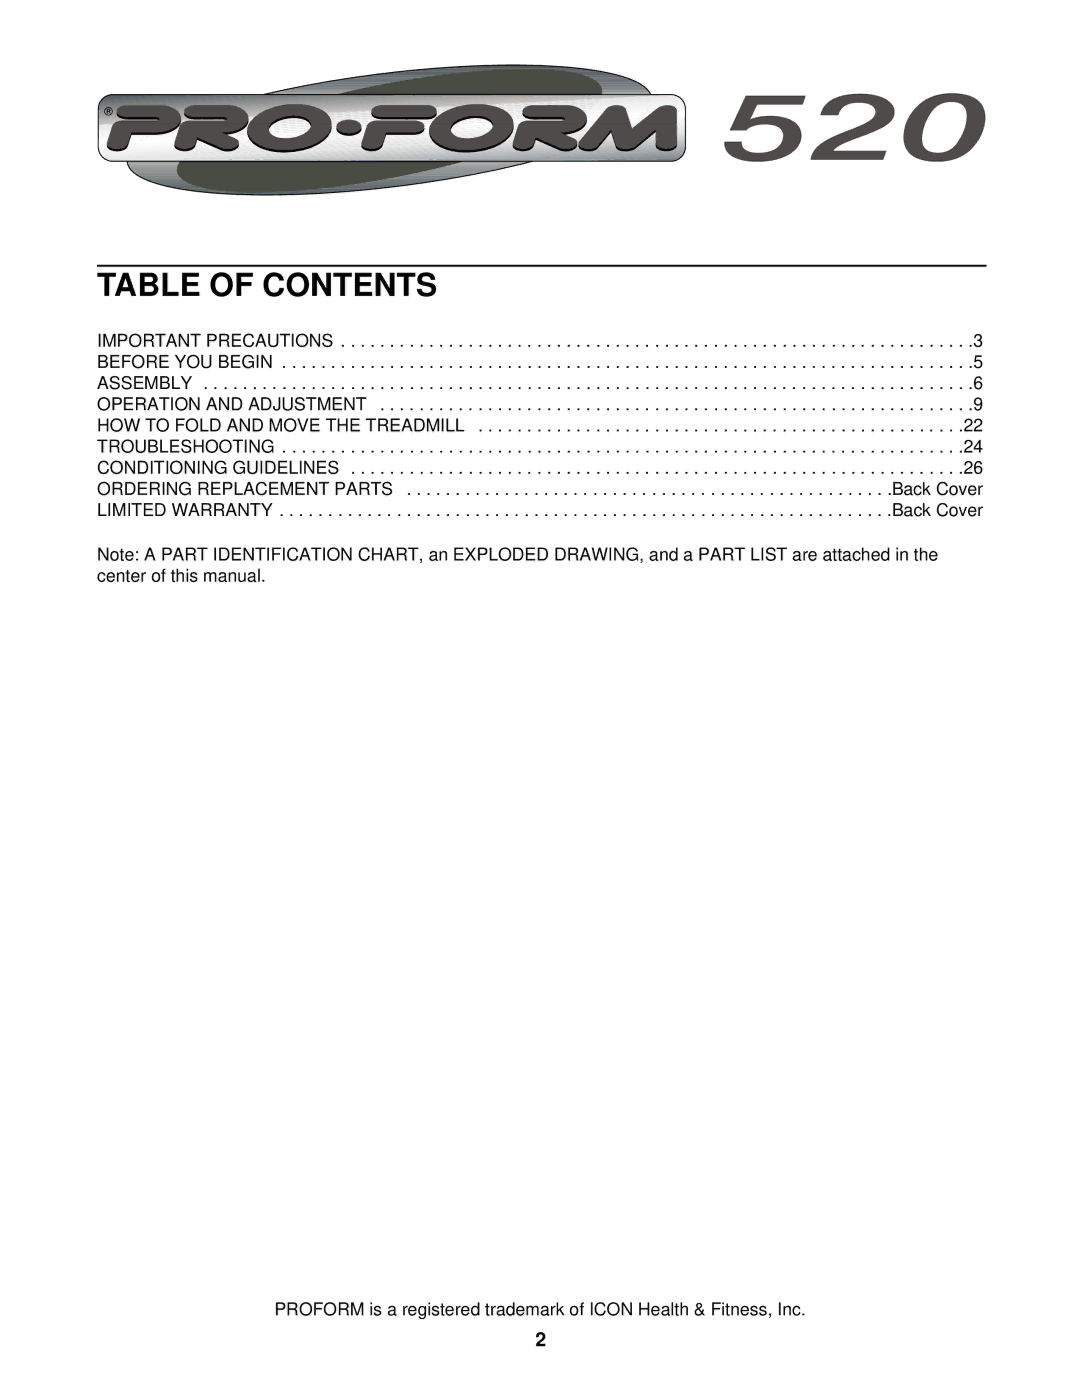 ProForm 520 user manual Table of Contents 